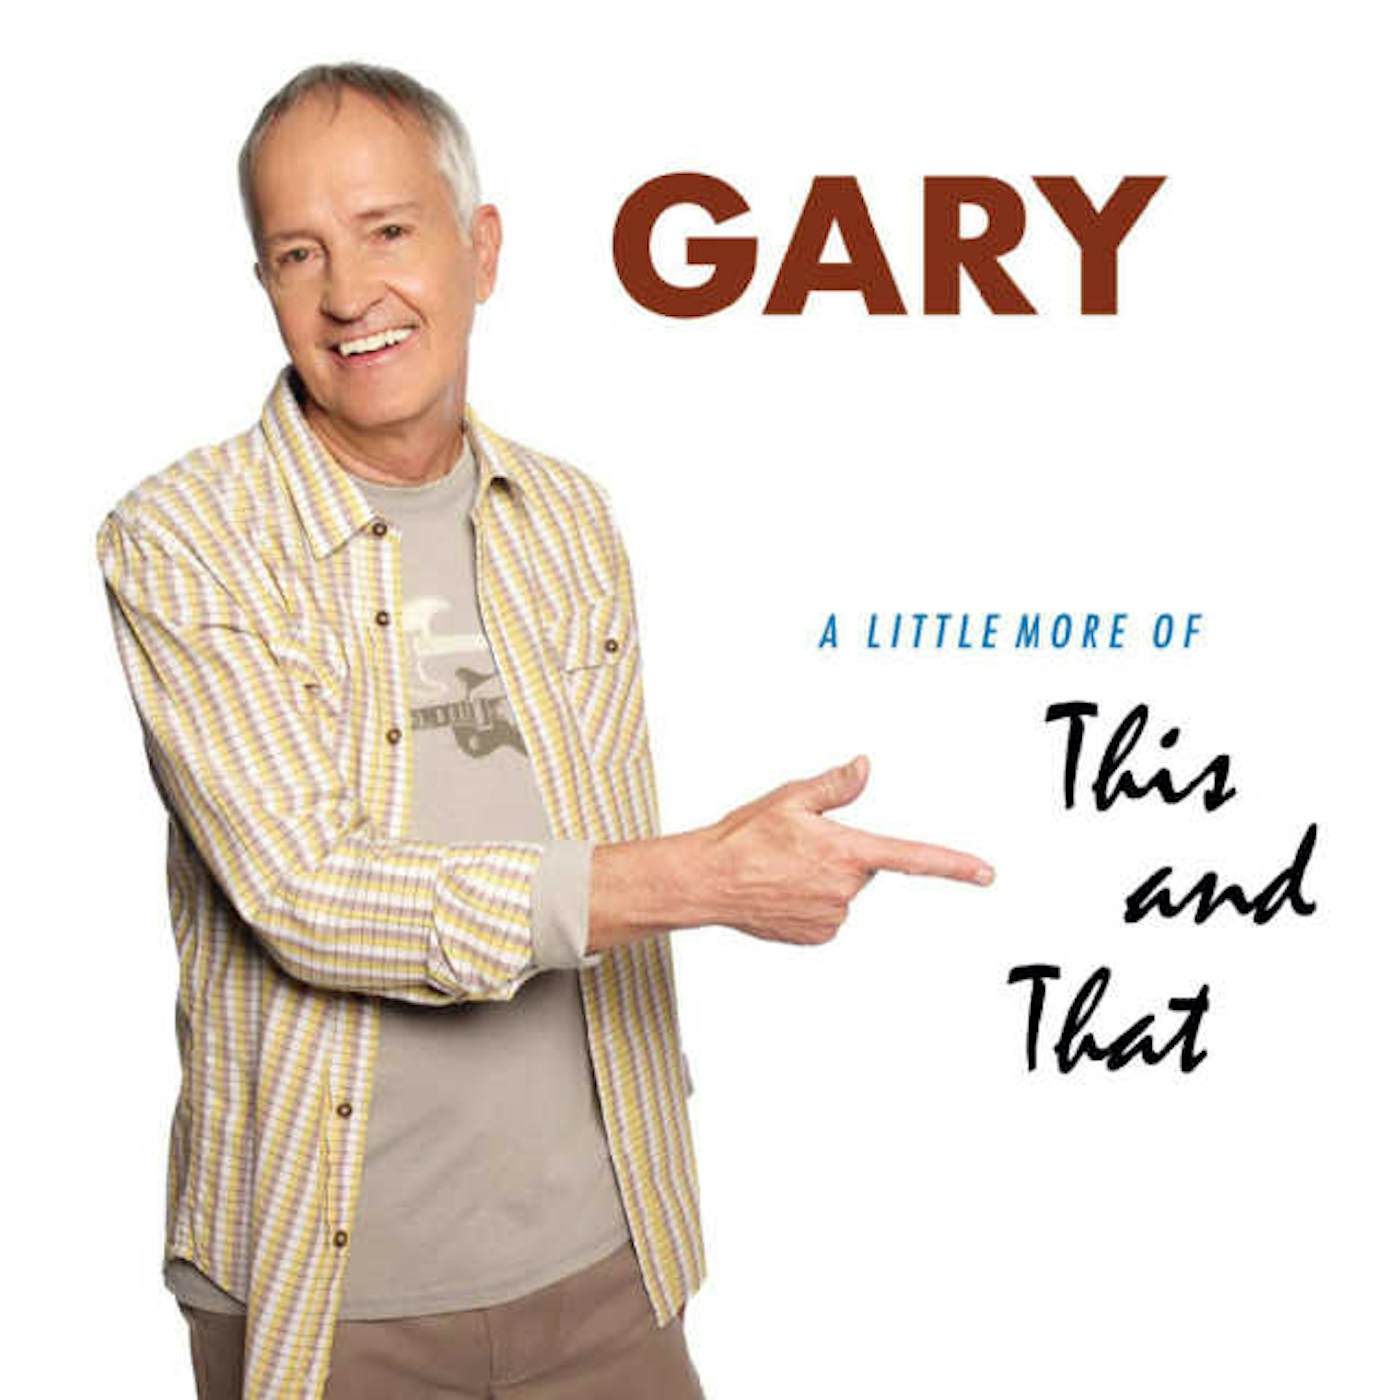 GARY LITTLE MORE OF THIS & THAT CD